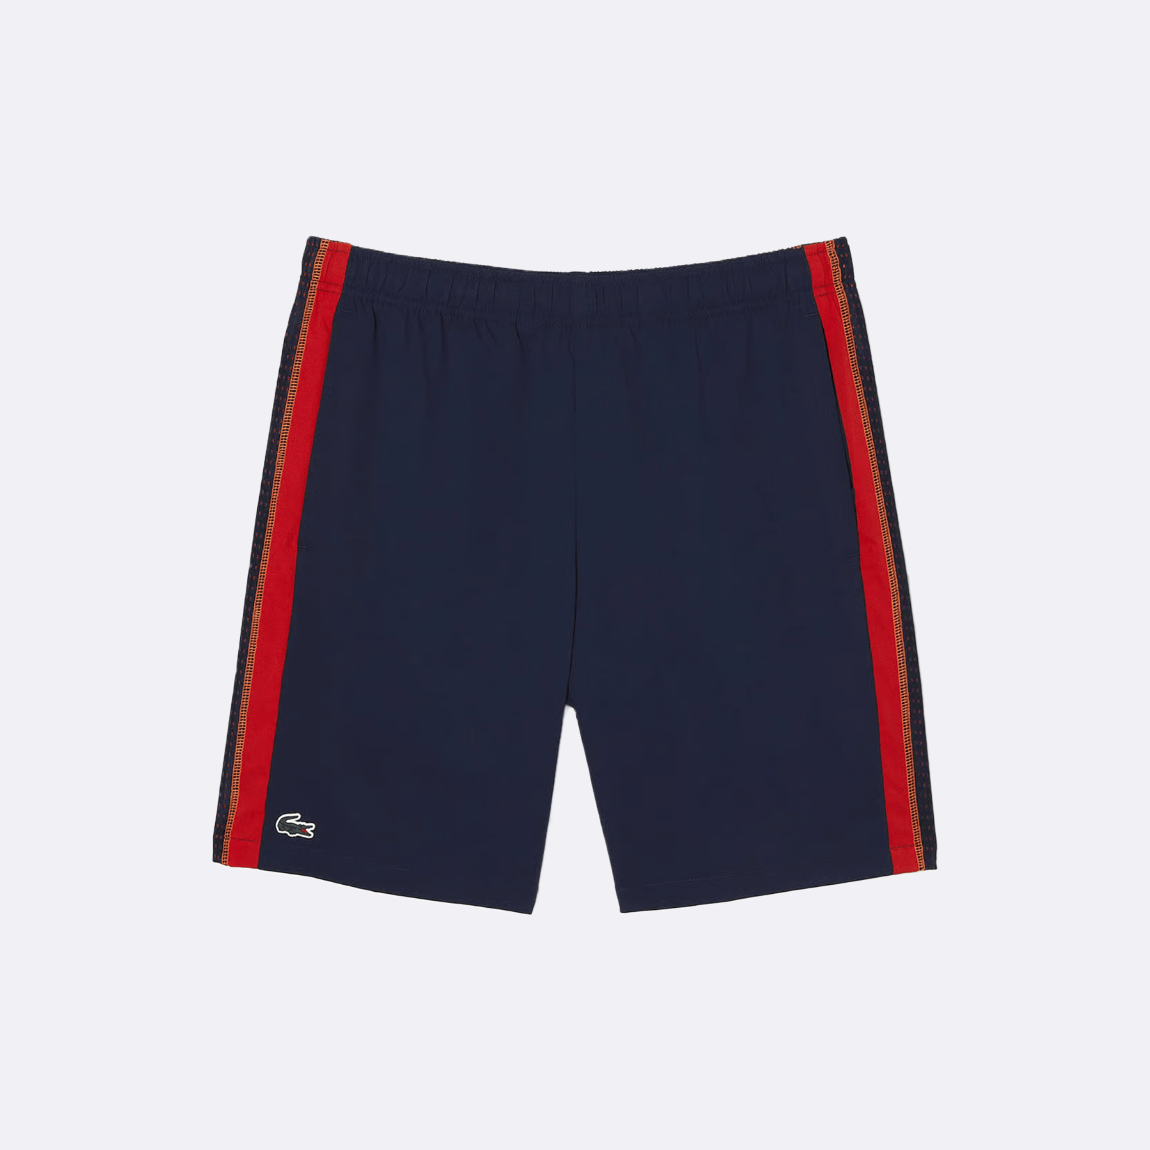 LACOSTE SHORT TENNIS NAVY/RED